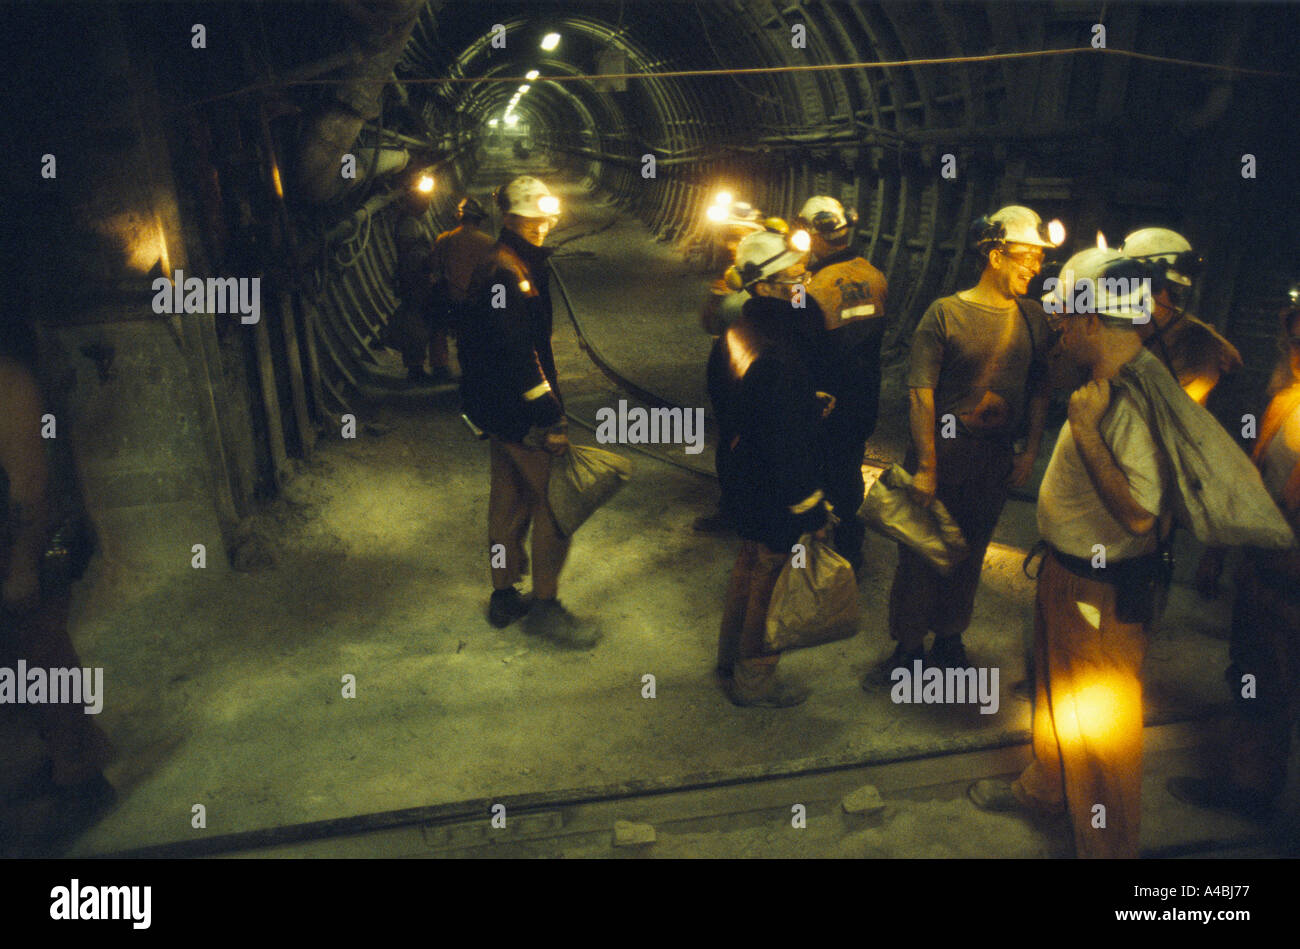 COALMINERS CHATTING WITH HEADTORCHES ON IN UNDERGROUND TUNNEL, CARRYING PAPER BAGS, Stock Photo